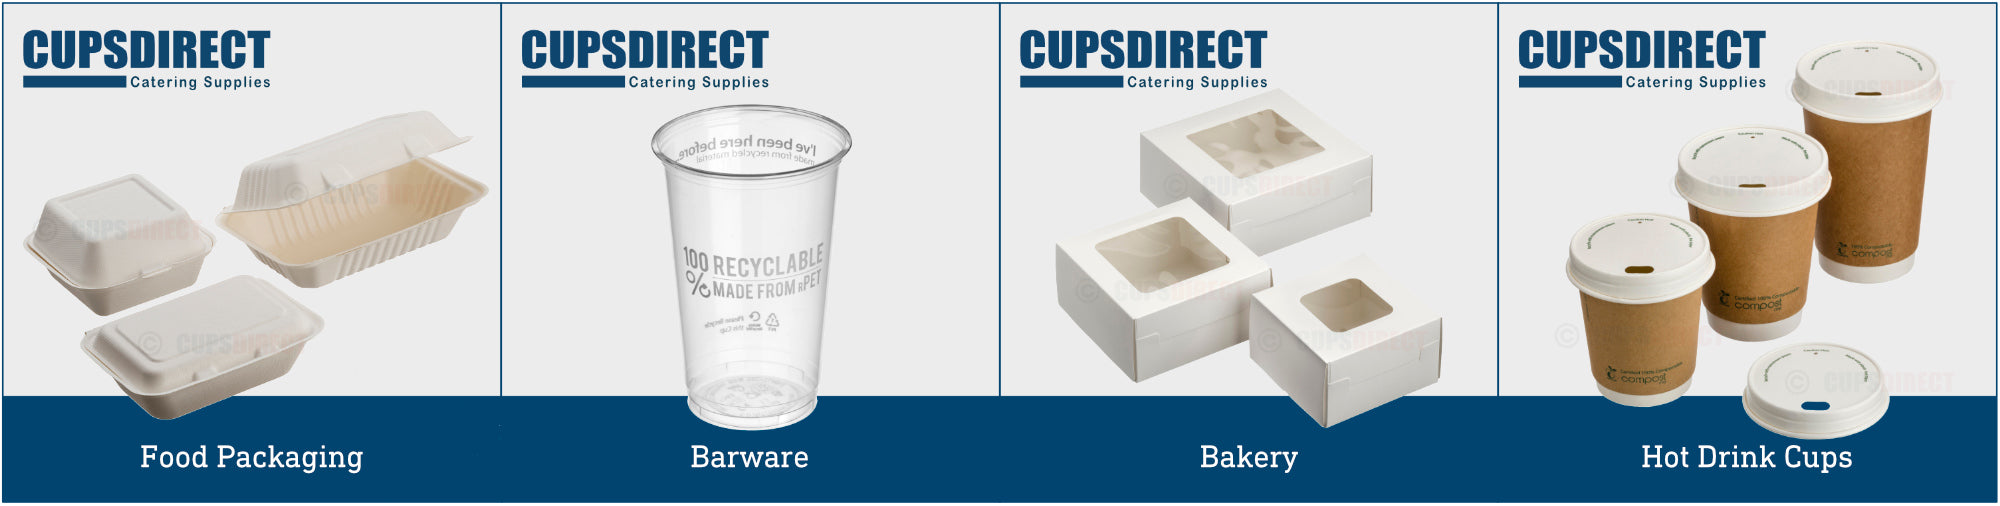 About CupsDirect